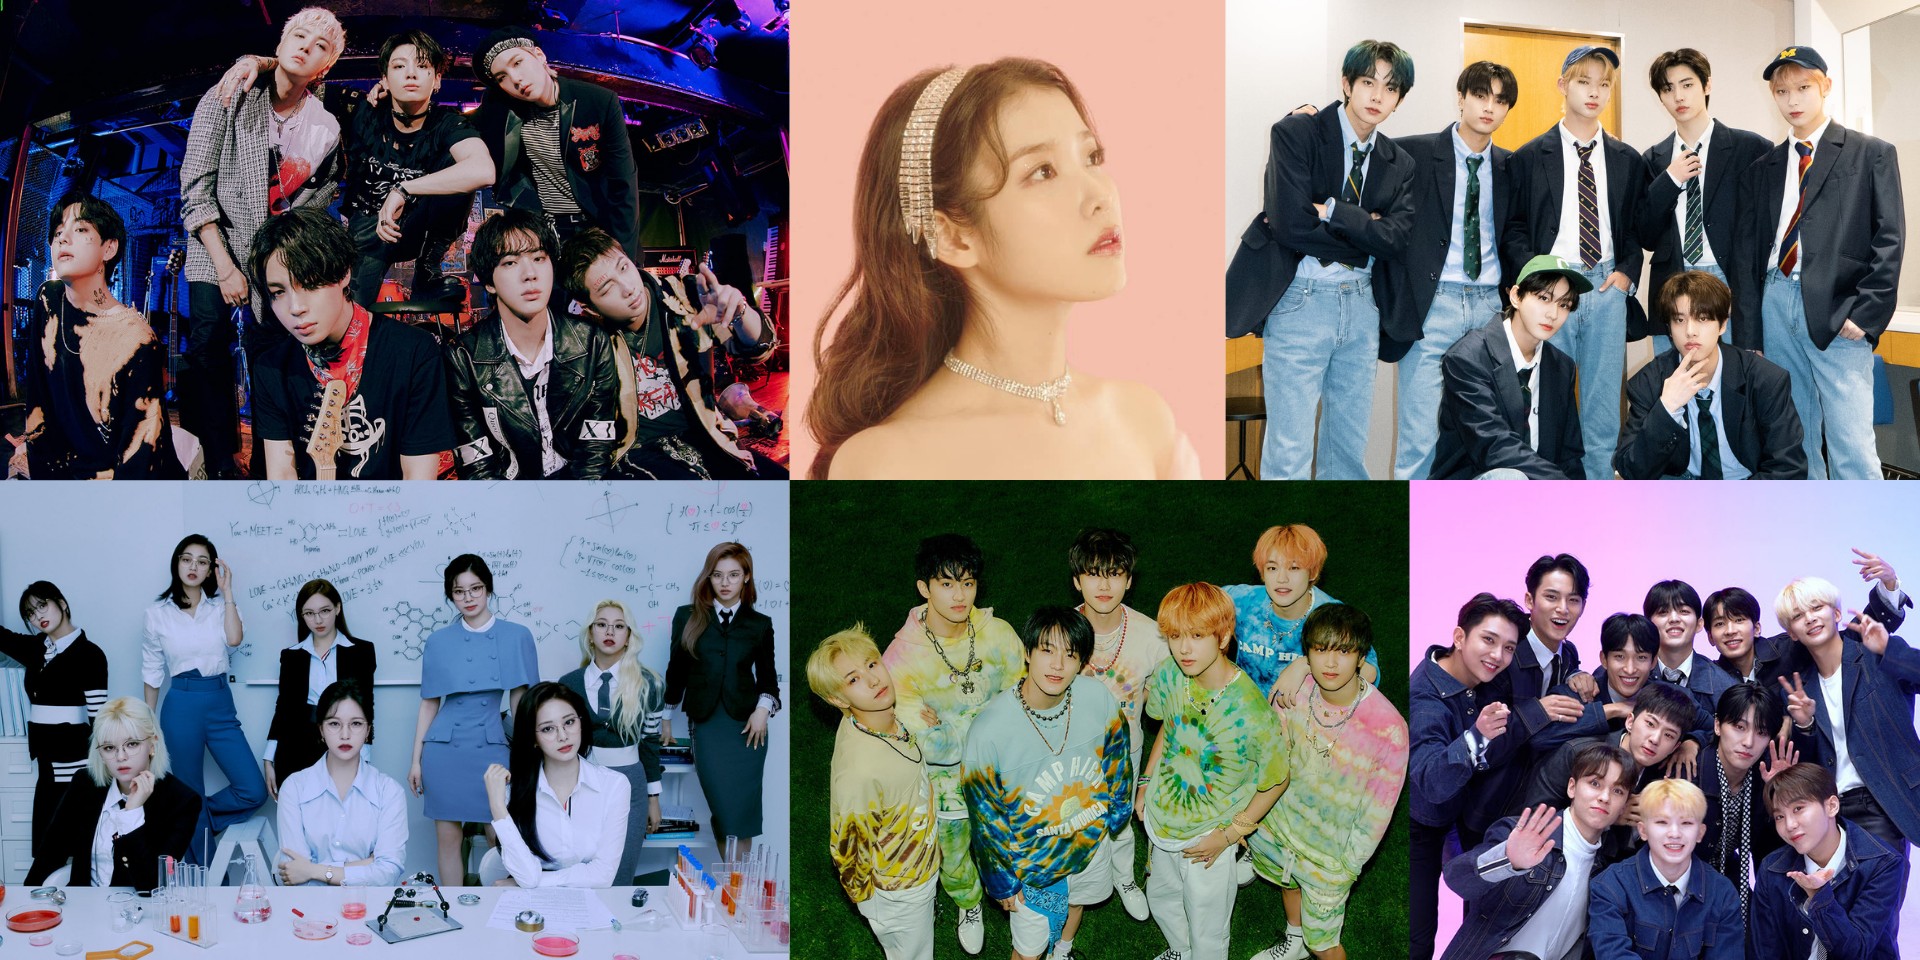 Here are the nominees for the 2021 Melon Music Awards – BTS, NCT DREAM, IU, TWICE, ENHYPEN, SEVENTEEN, Red Velvet, and more